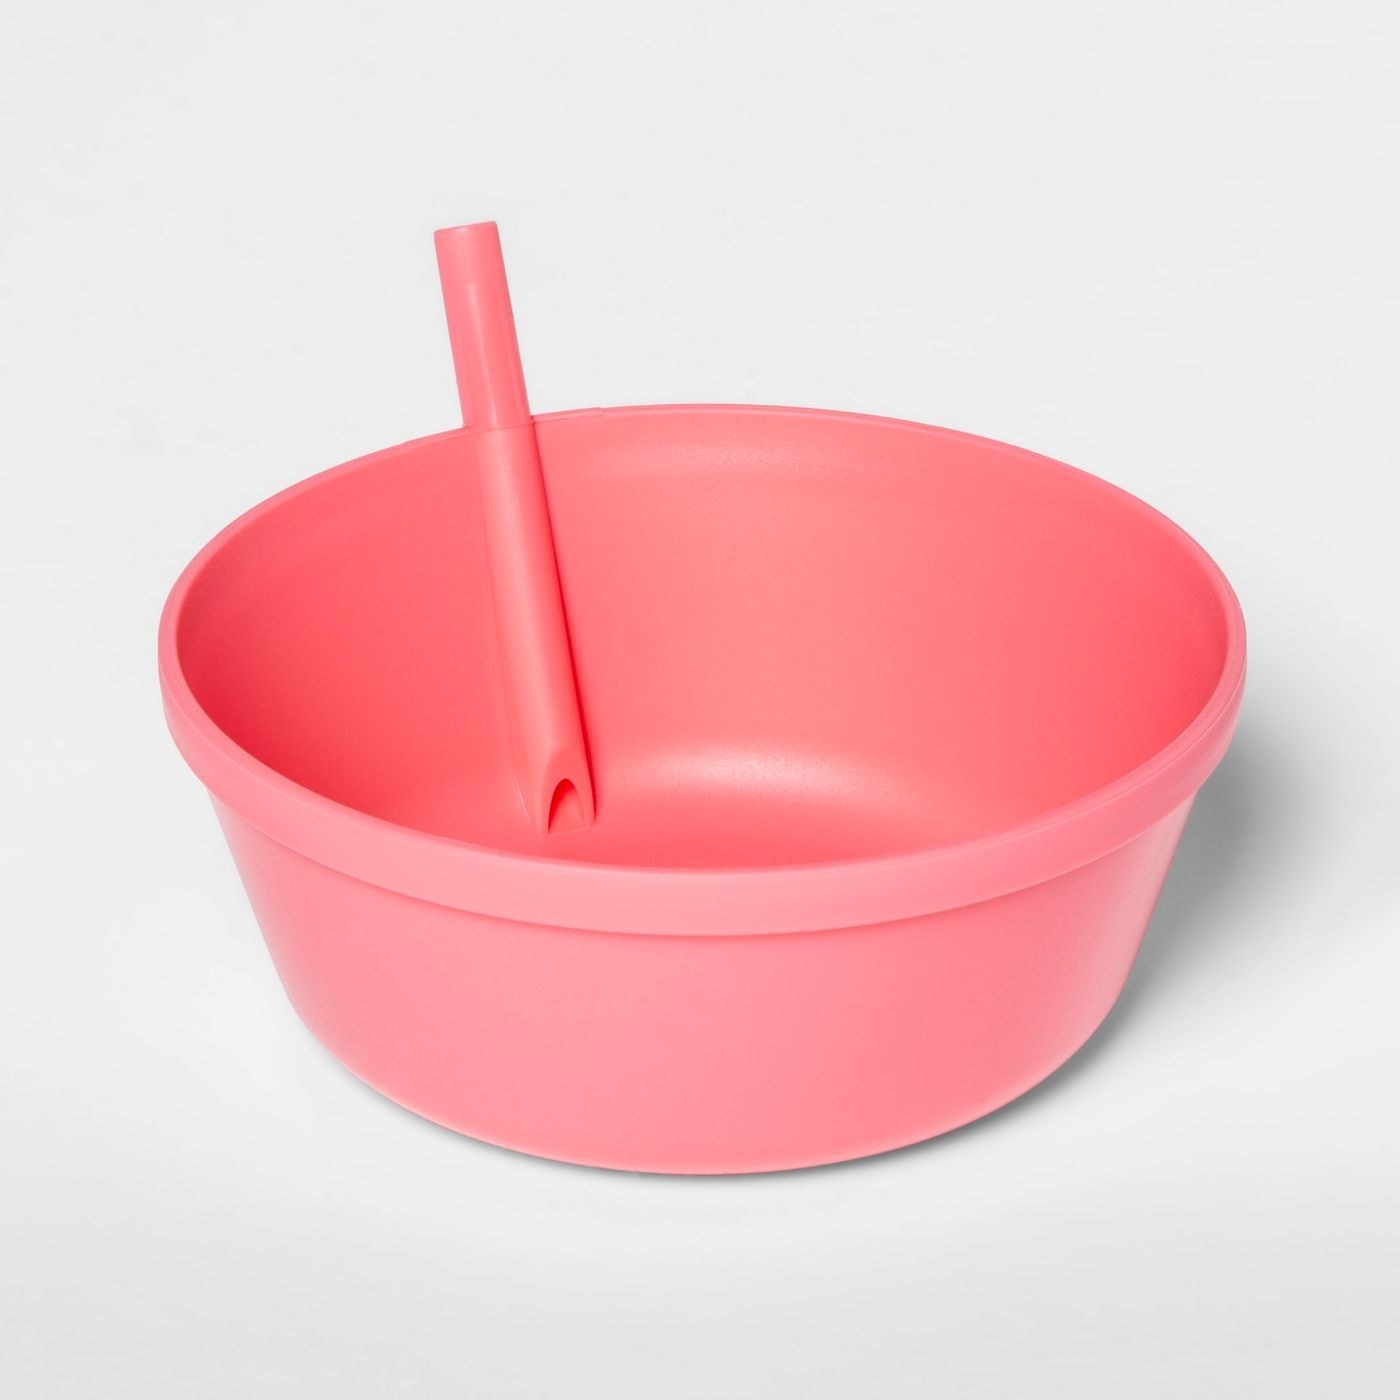 Pink cereal bowl with built-in straw